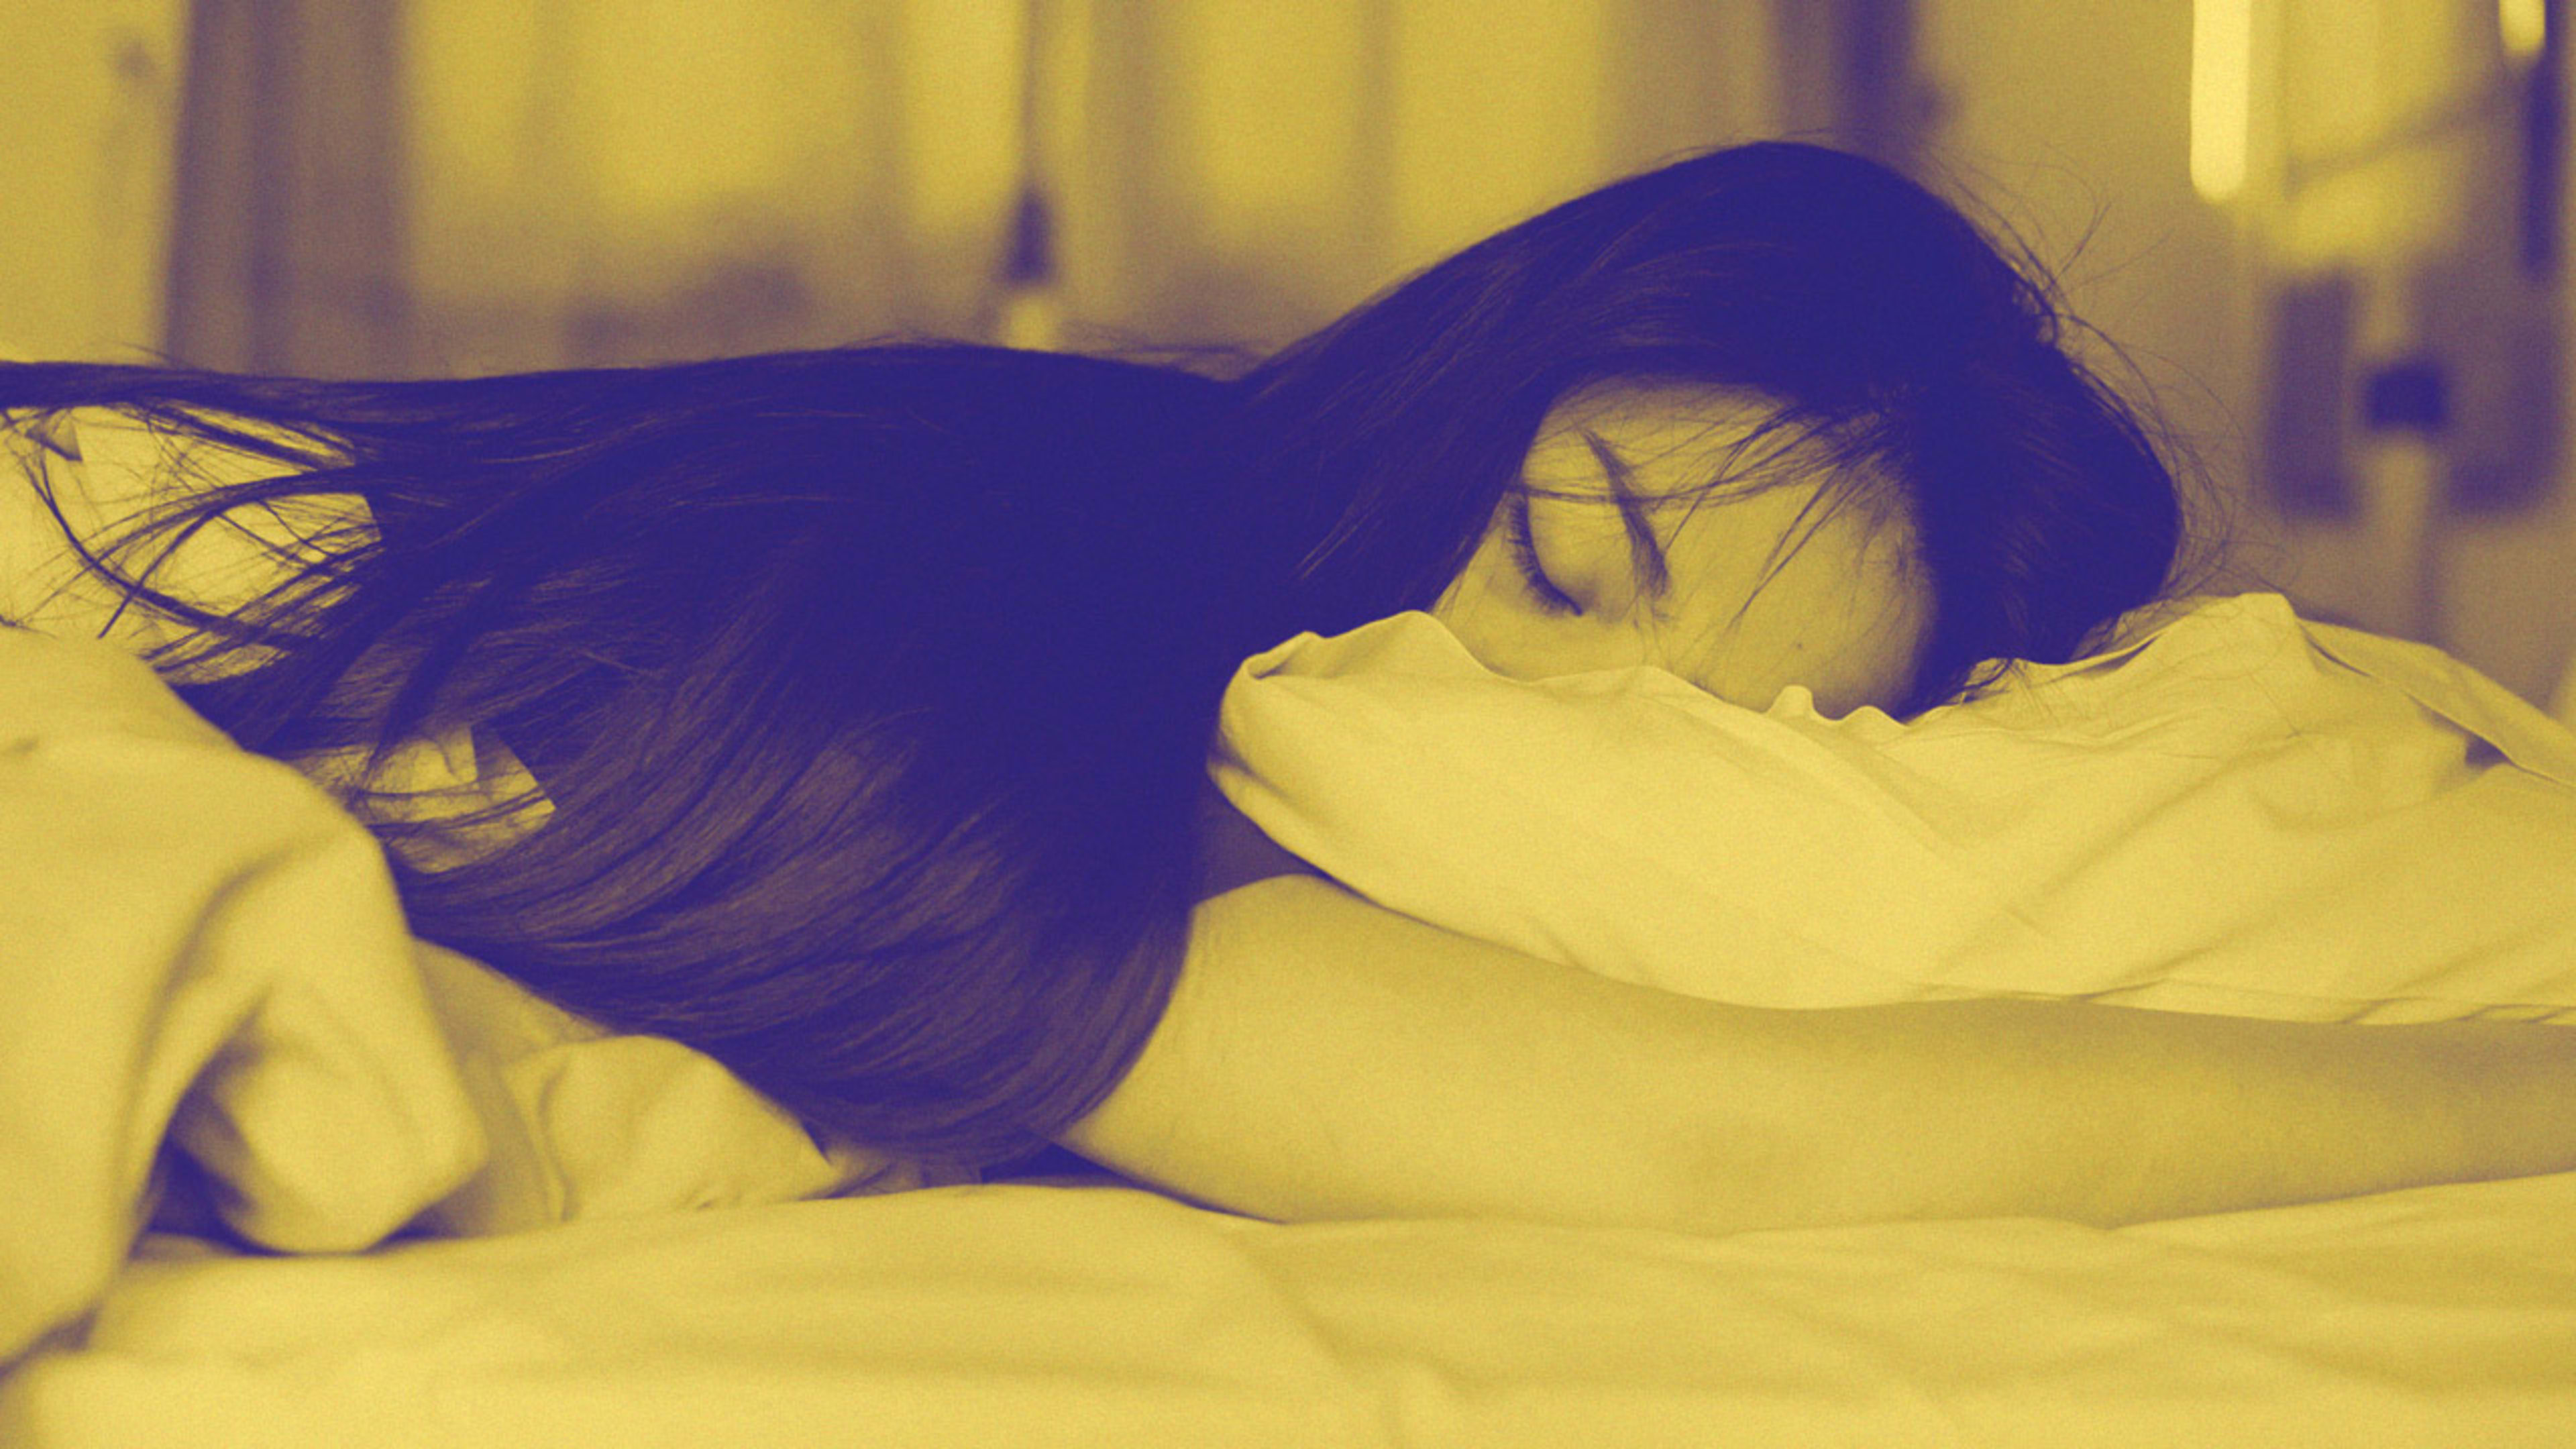 Americans Are Getting A Lot More Sleep Than We Think